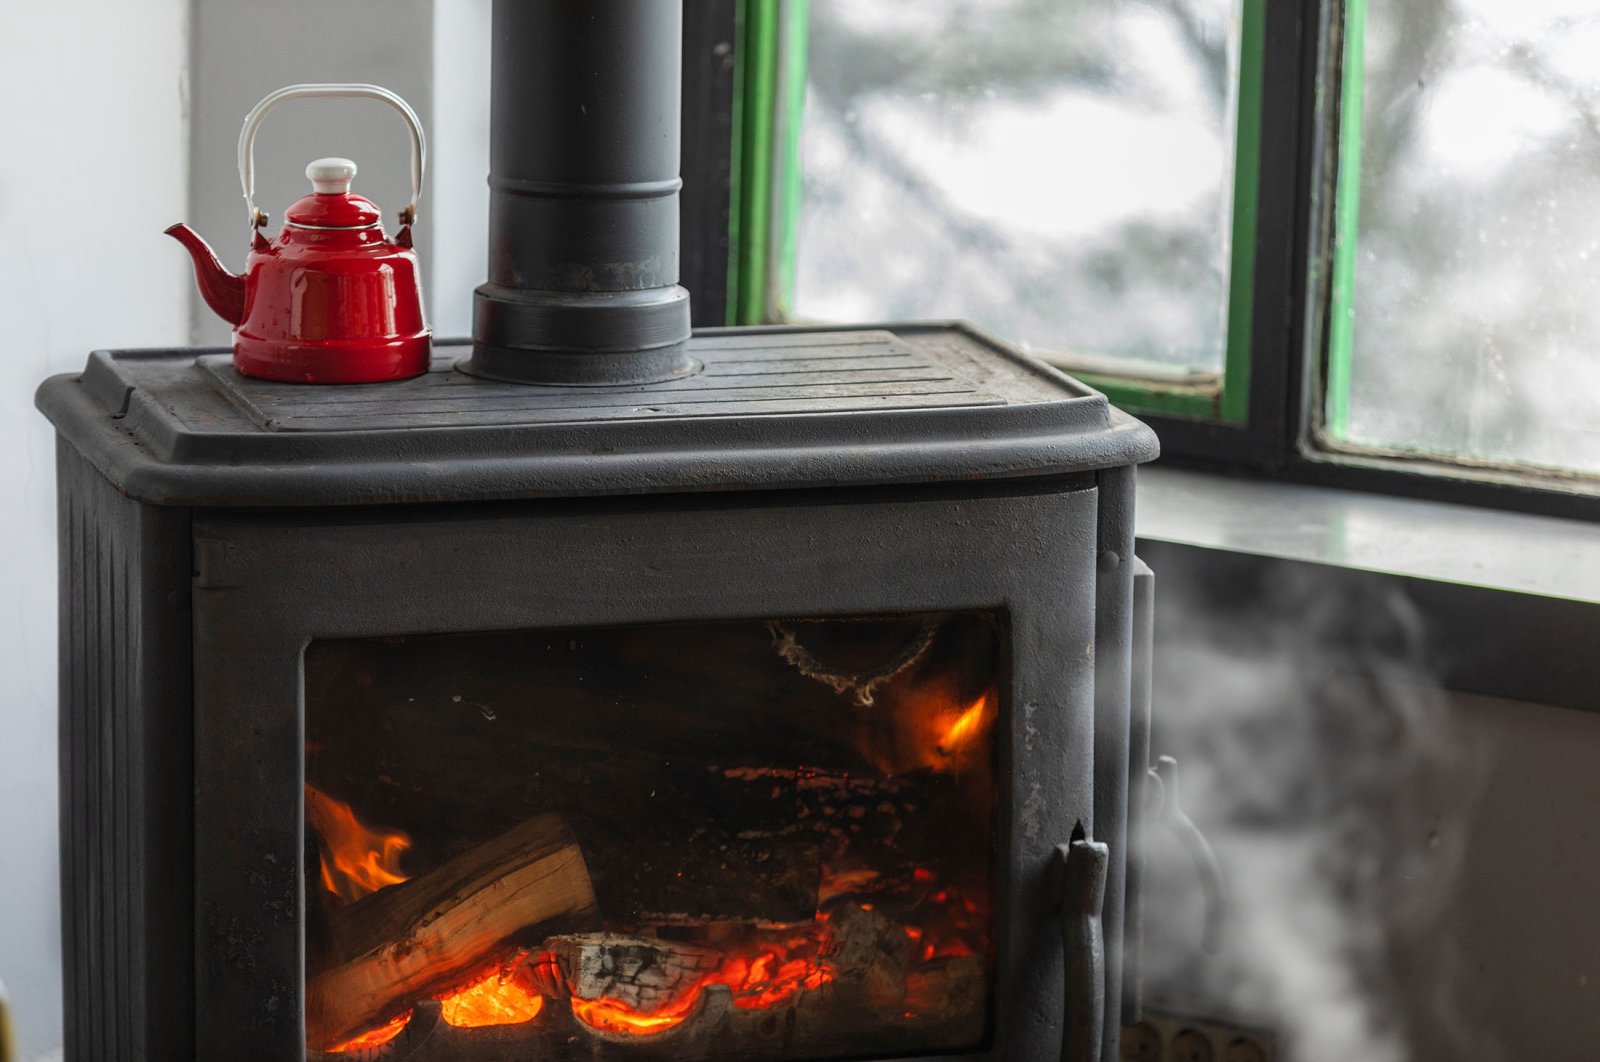 As the winter season approaches, the hottest topic in any town in Türkiye will undoubtedly be how people plan to heat their homes. (Shutterstock Photo)